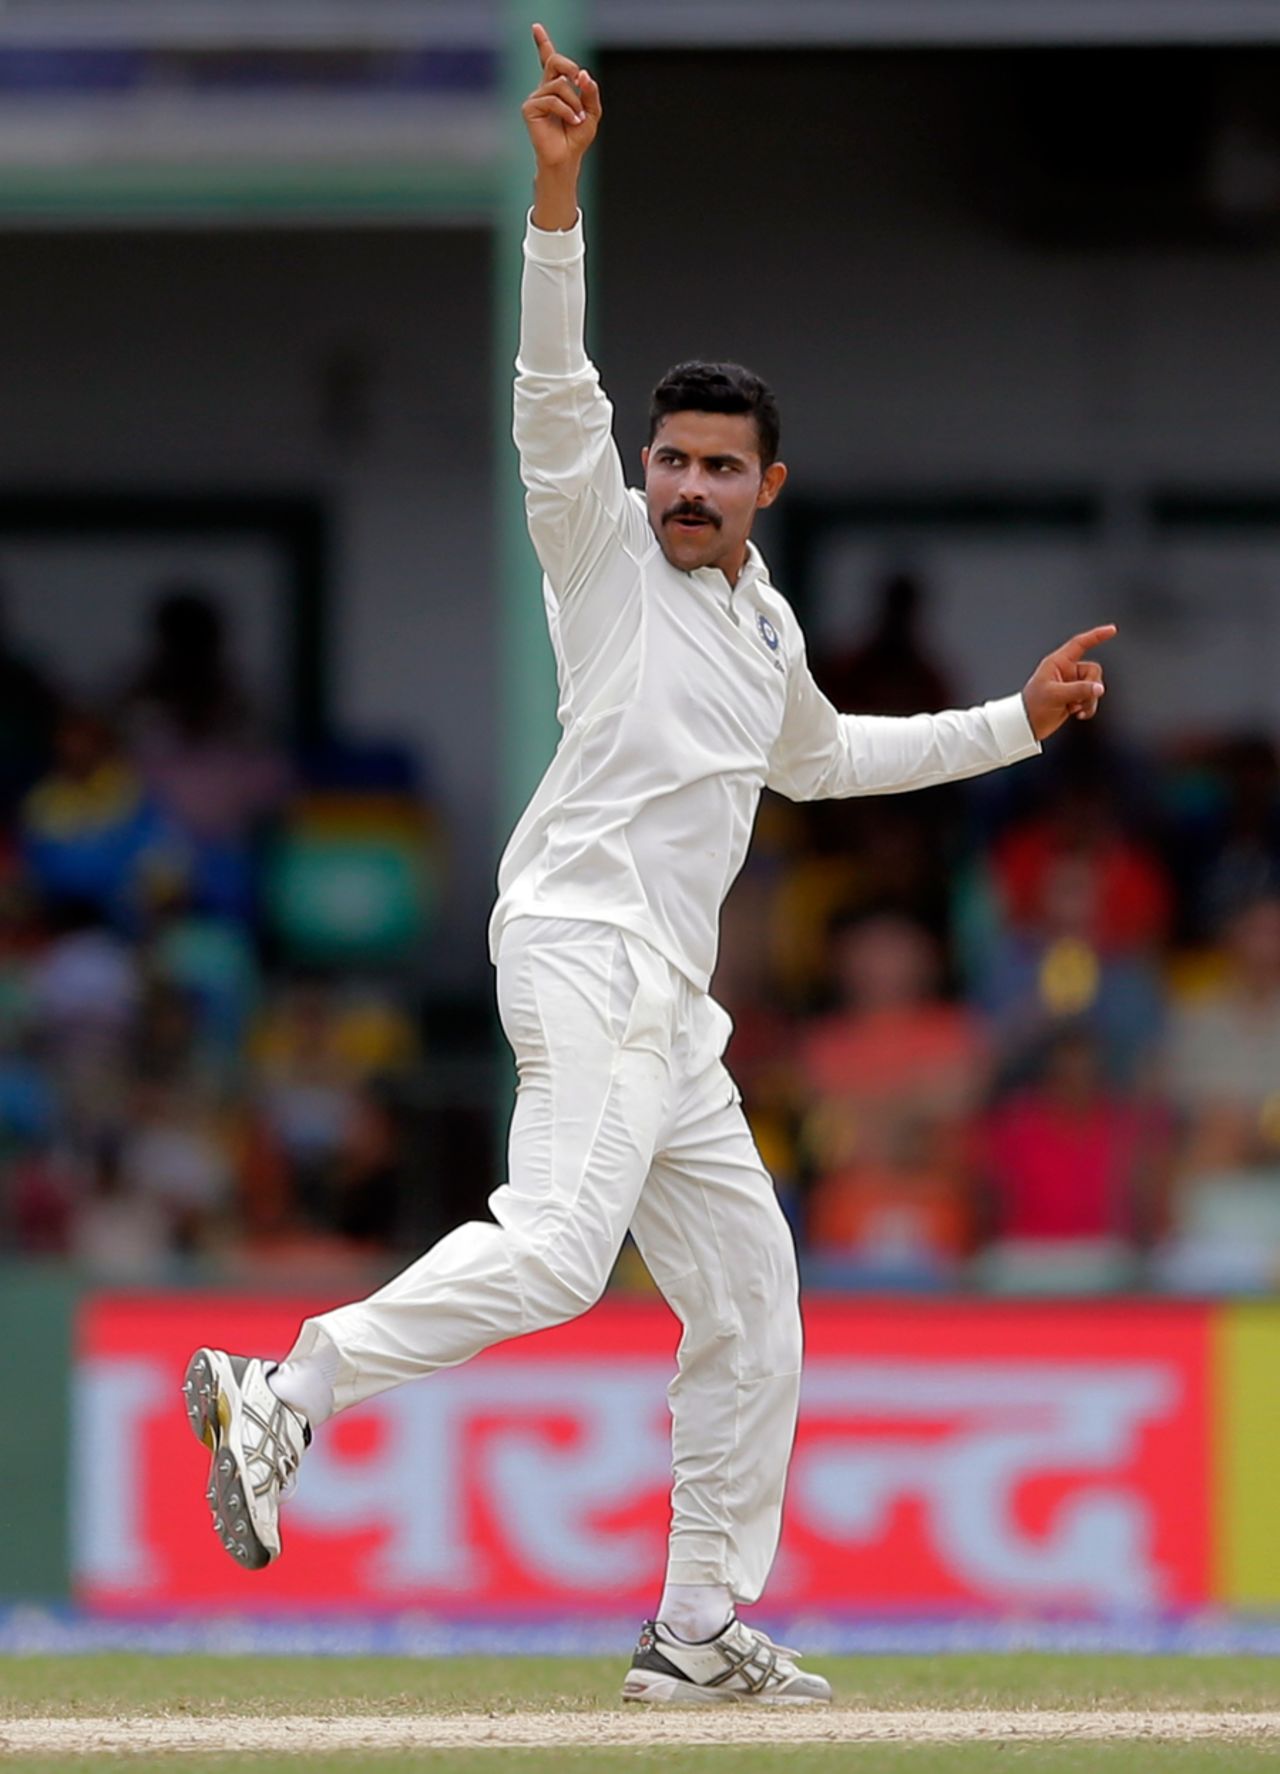 Ravindra Jadeja rattled through the Sri Lanka line-up with a five-for, Sri Lanka v India, 2nd Test, SSC, 4th day, Colombo, August 6, 2017